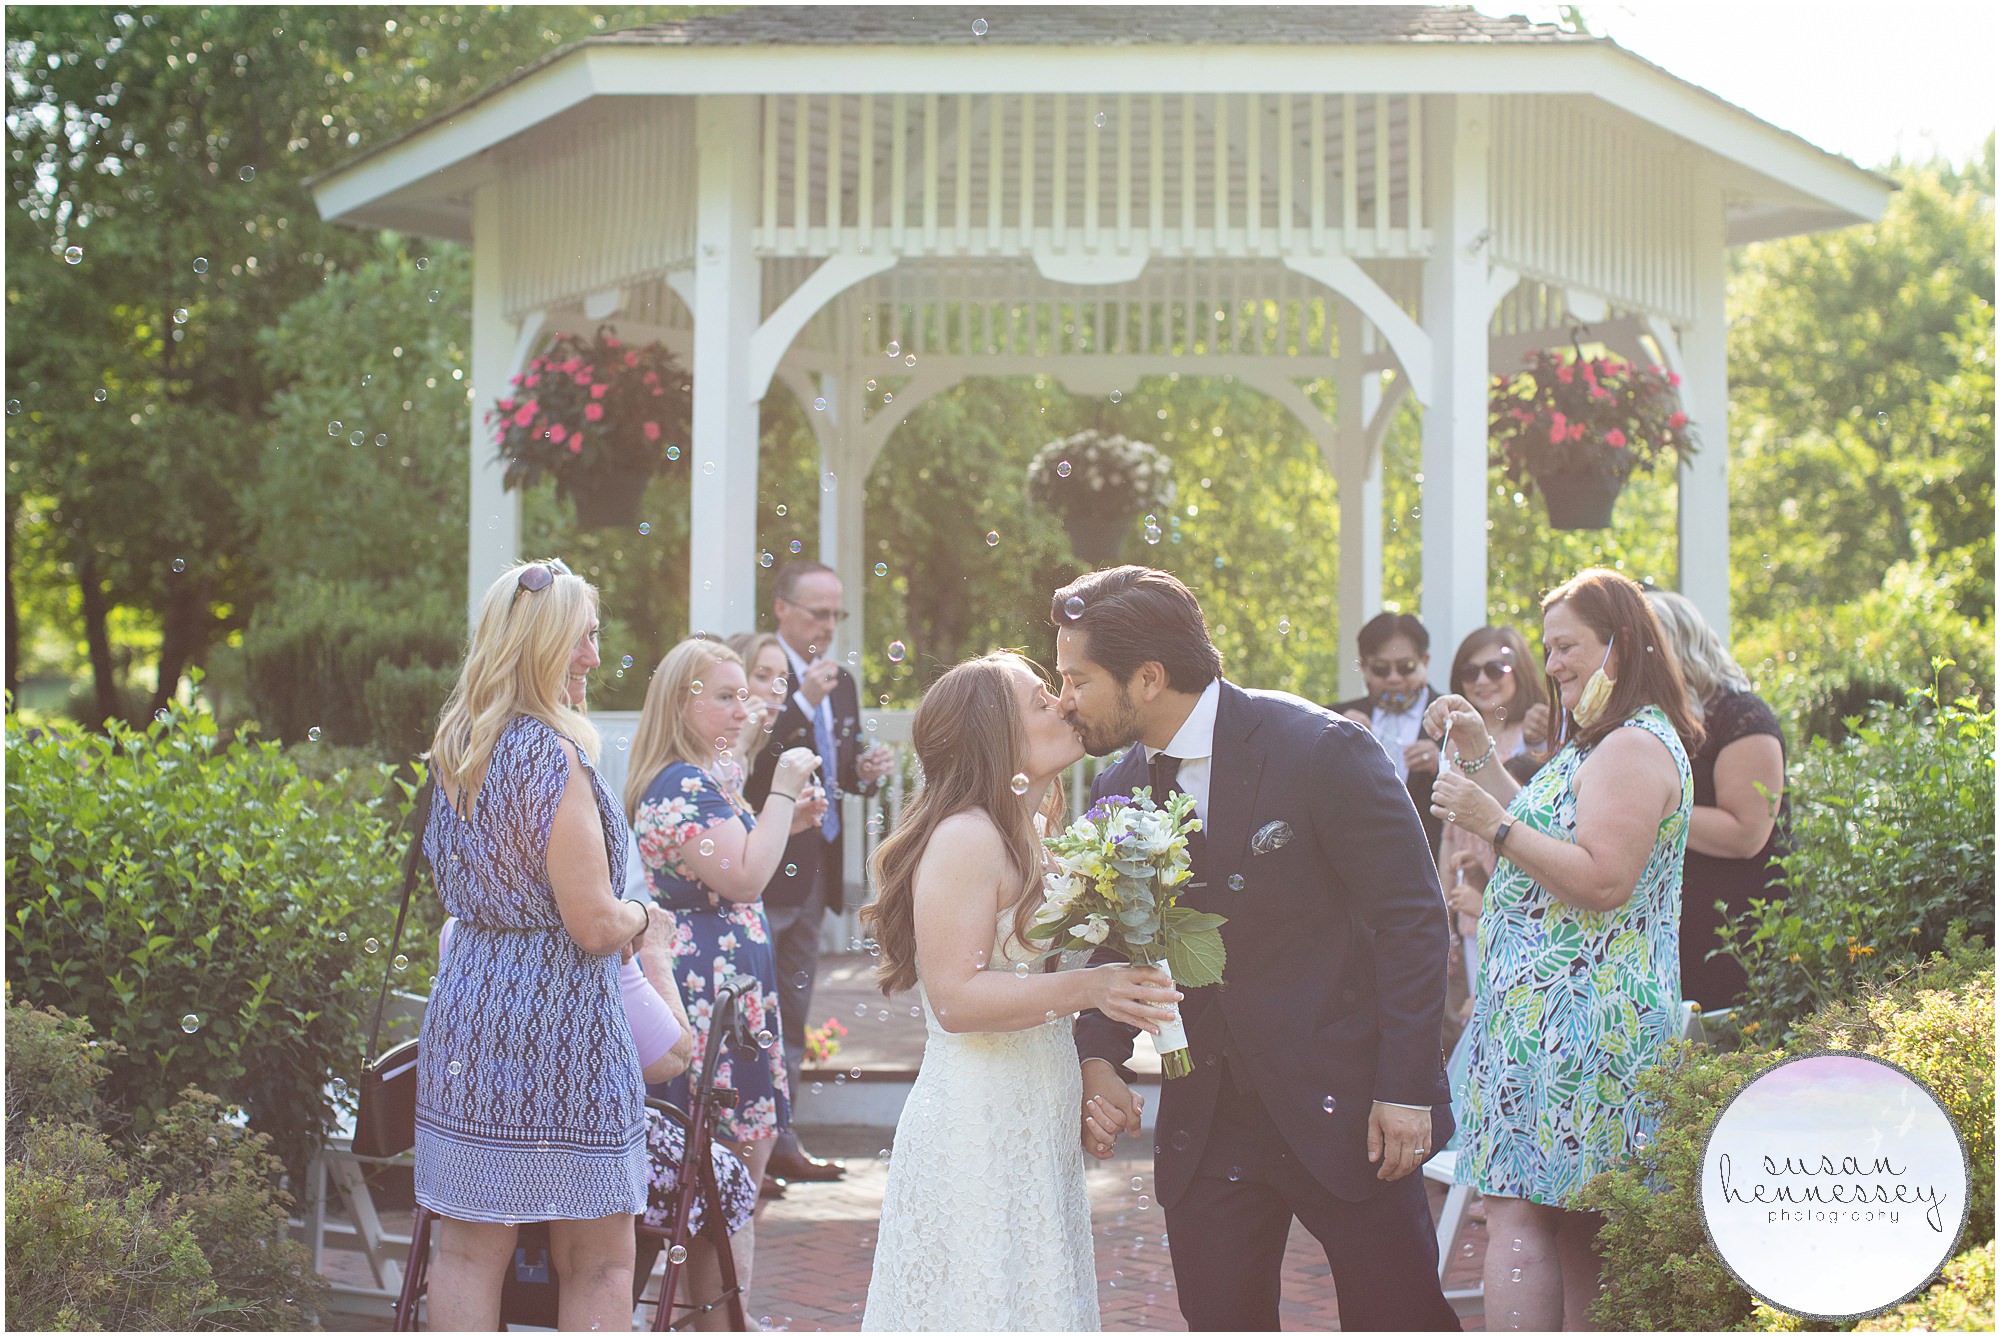 Susan Hennessey Photography Best of 2020 Weddings - Sayen Gardens Microwedding bubble exit